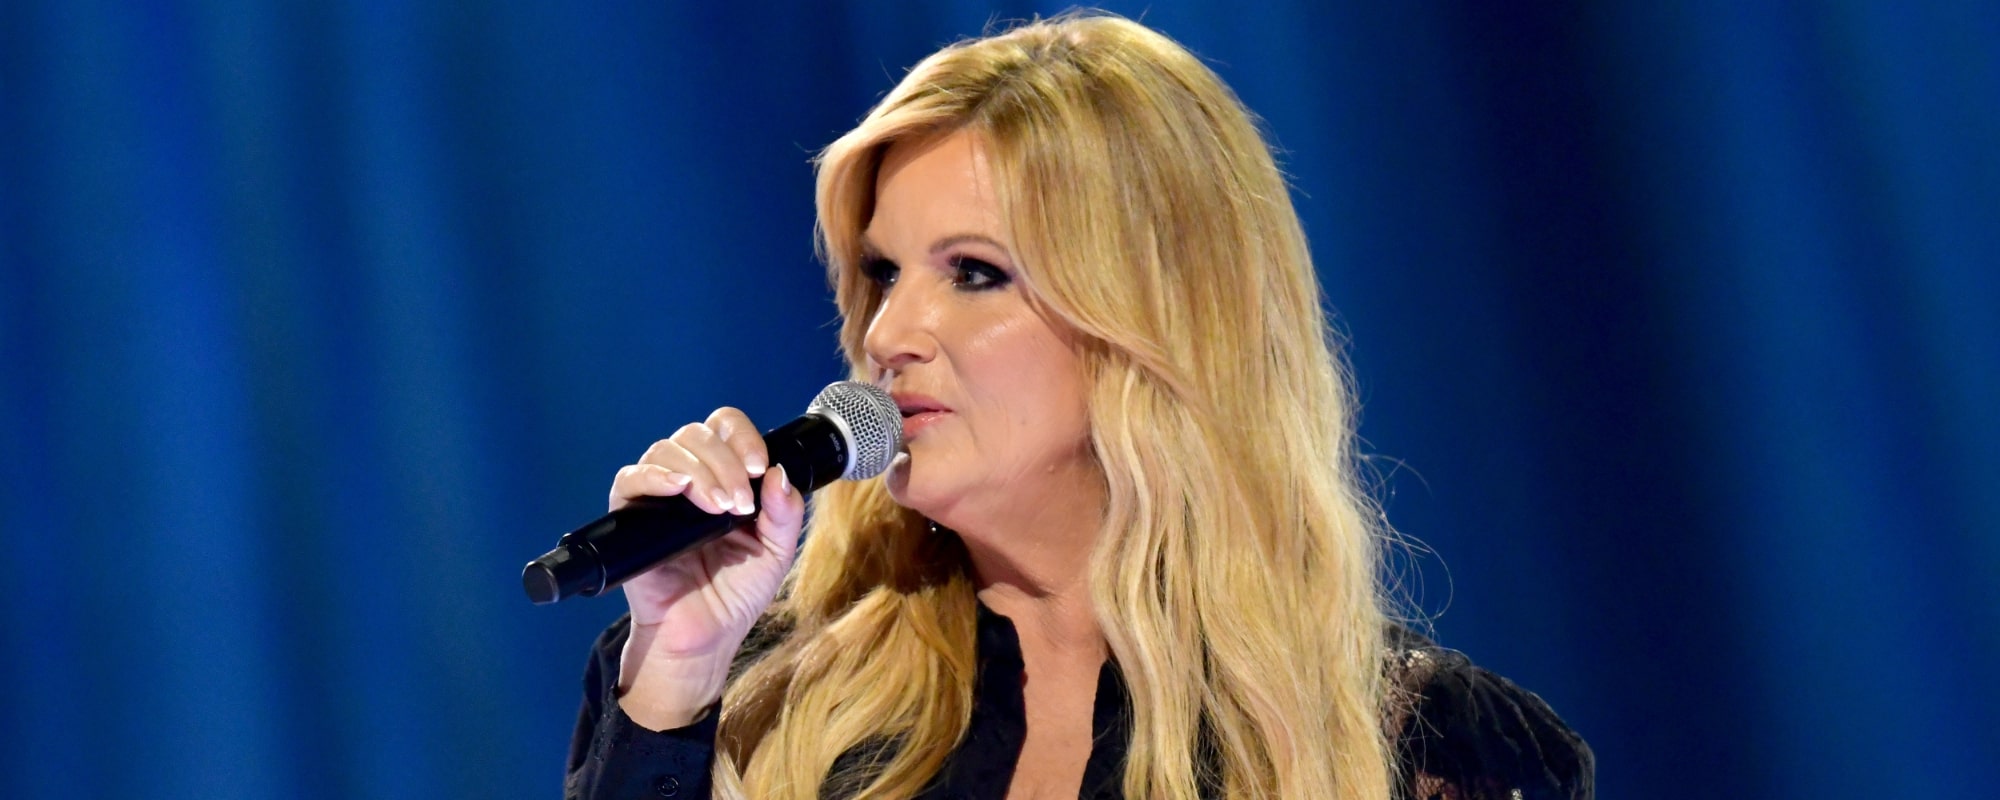 Trisha Yearwood Talks How Her Family Keeps Her “Grounded” After Decades of Success